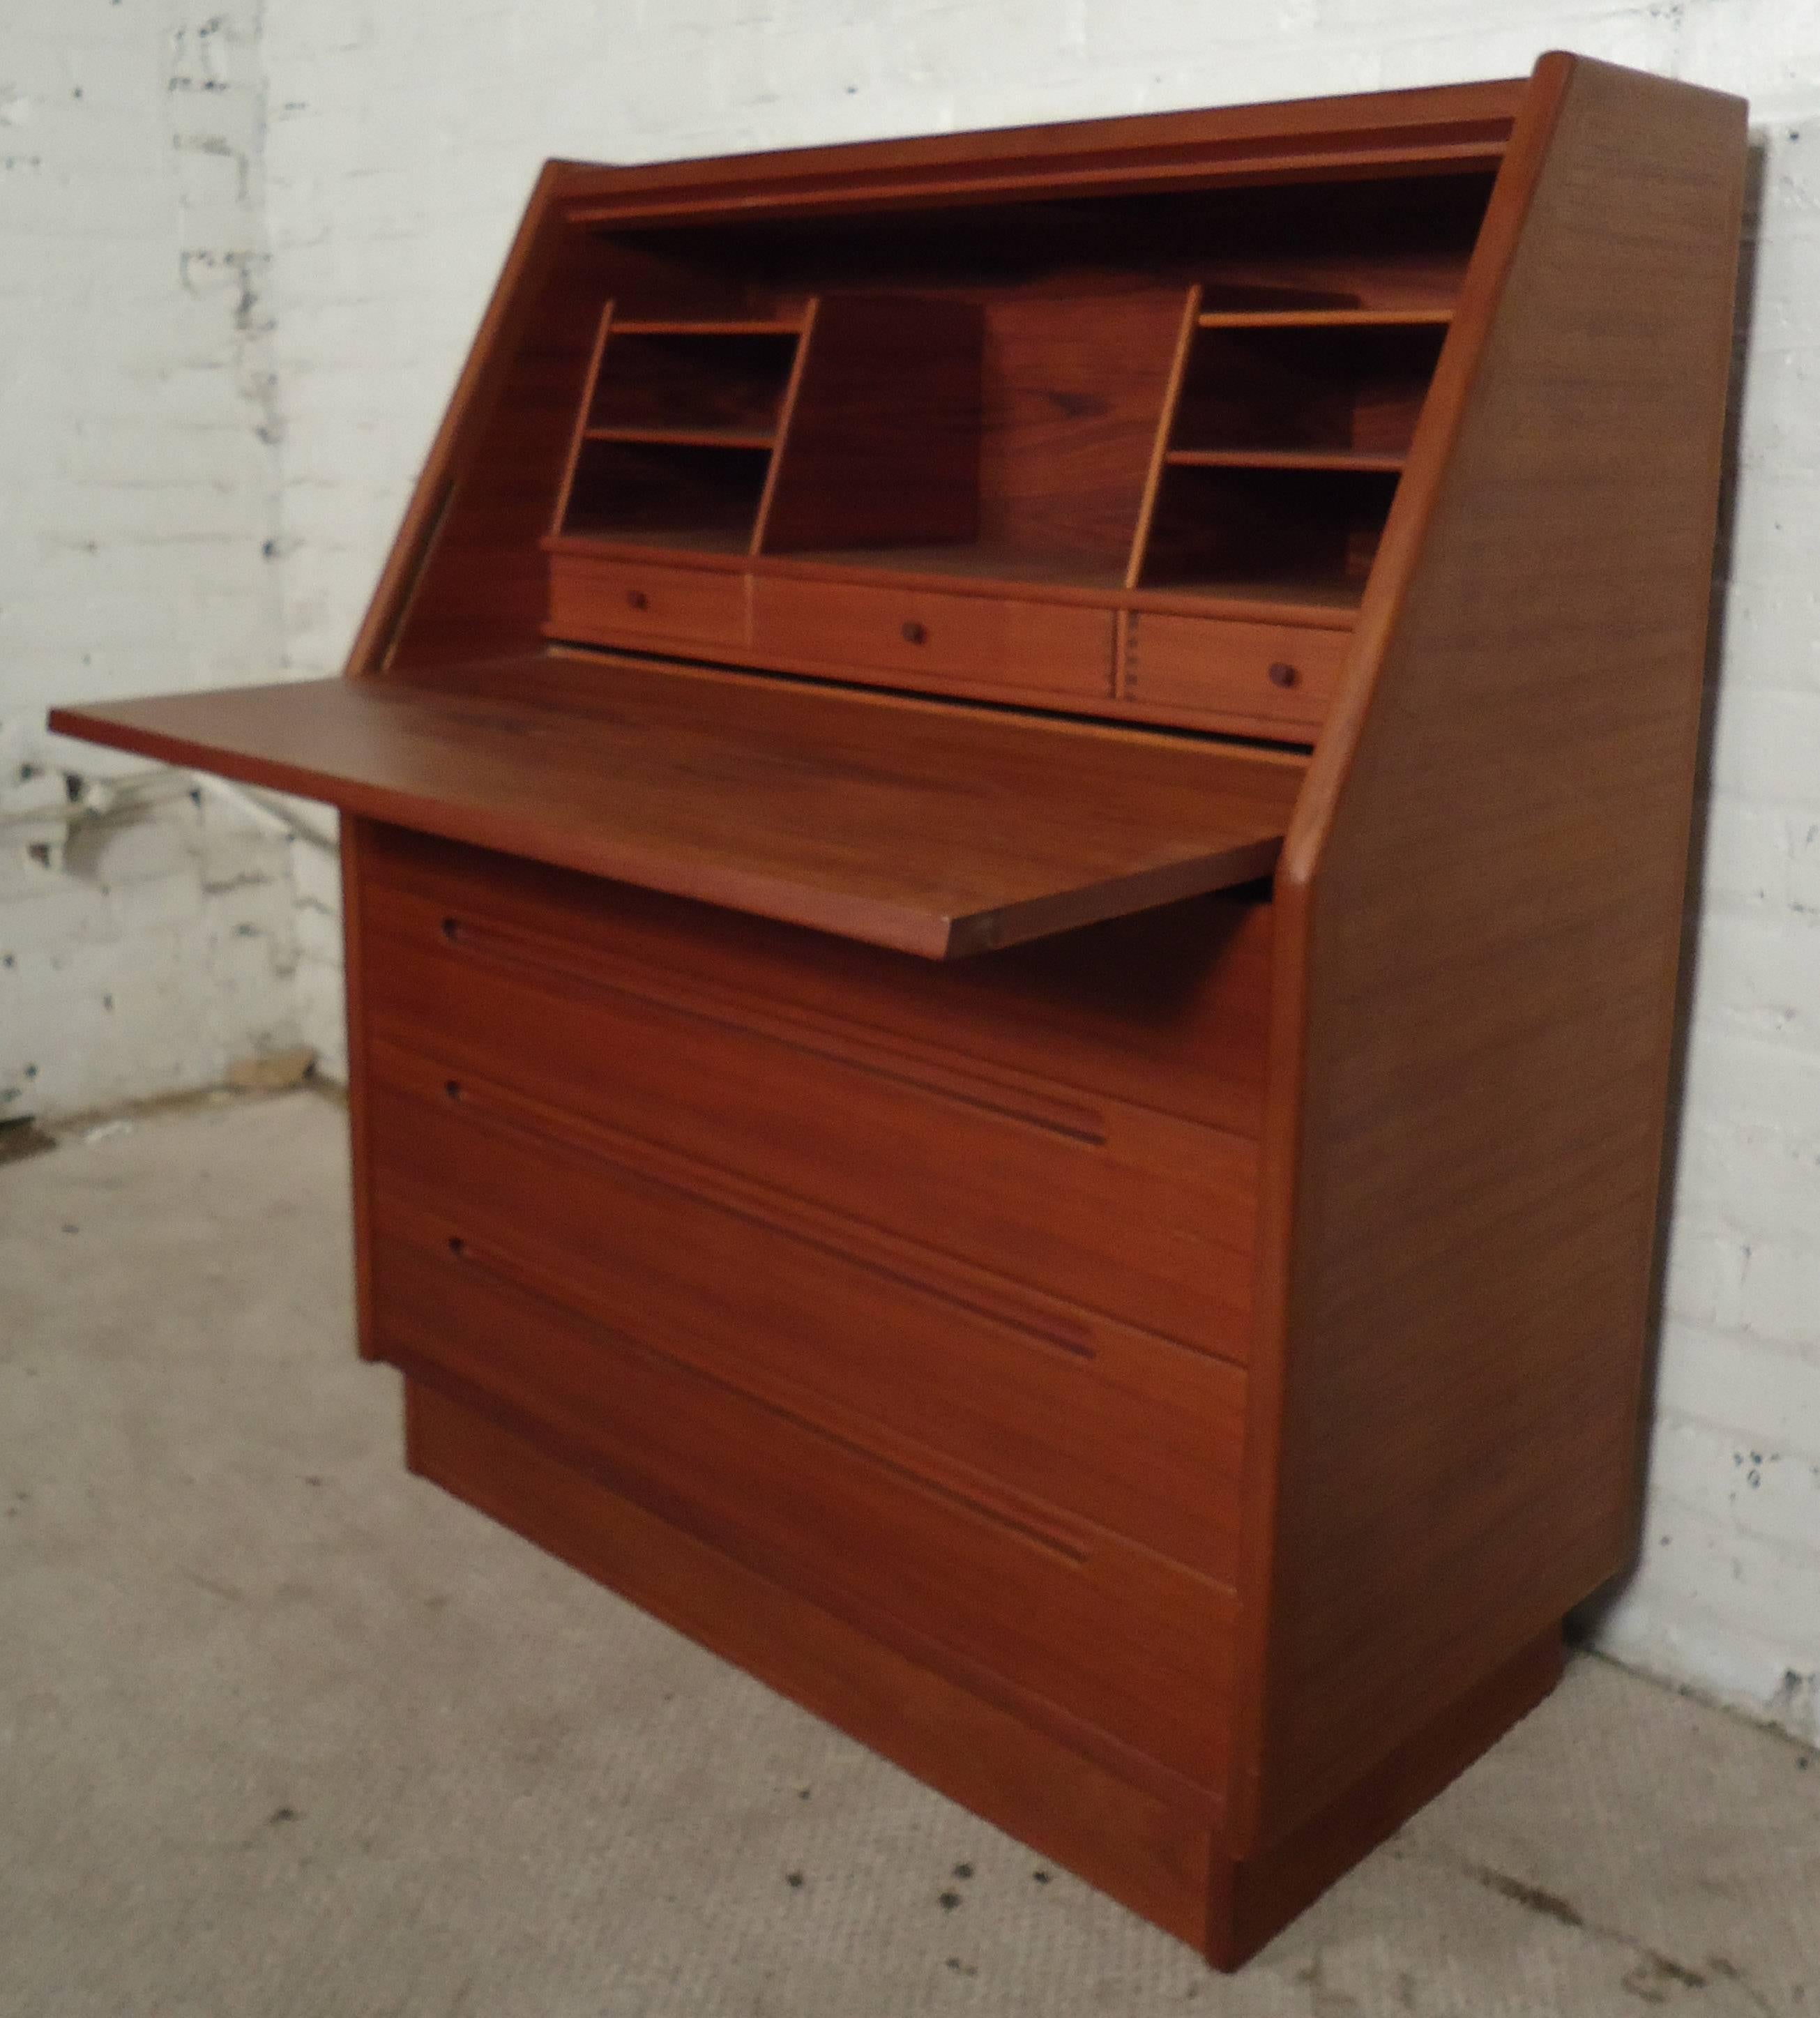 Vintage-modern Danish desk by Torring Mobelfabrik, features drop front writing station revealing interior storage compartments and drawers, Bottom front has four large drawers with sculpted handles.

Please confirm item location NY or NJ with